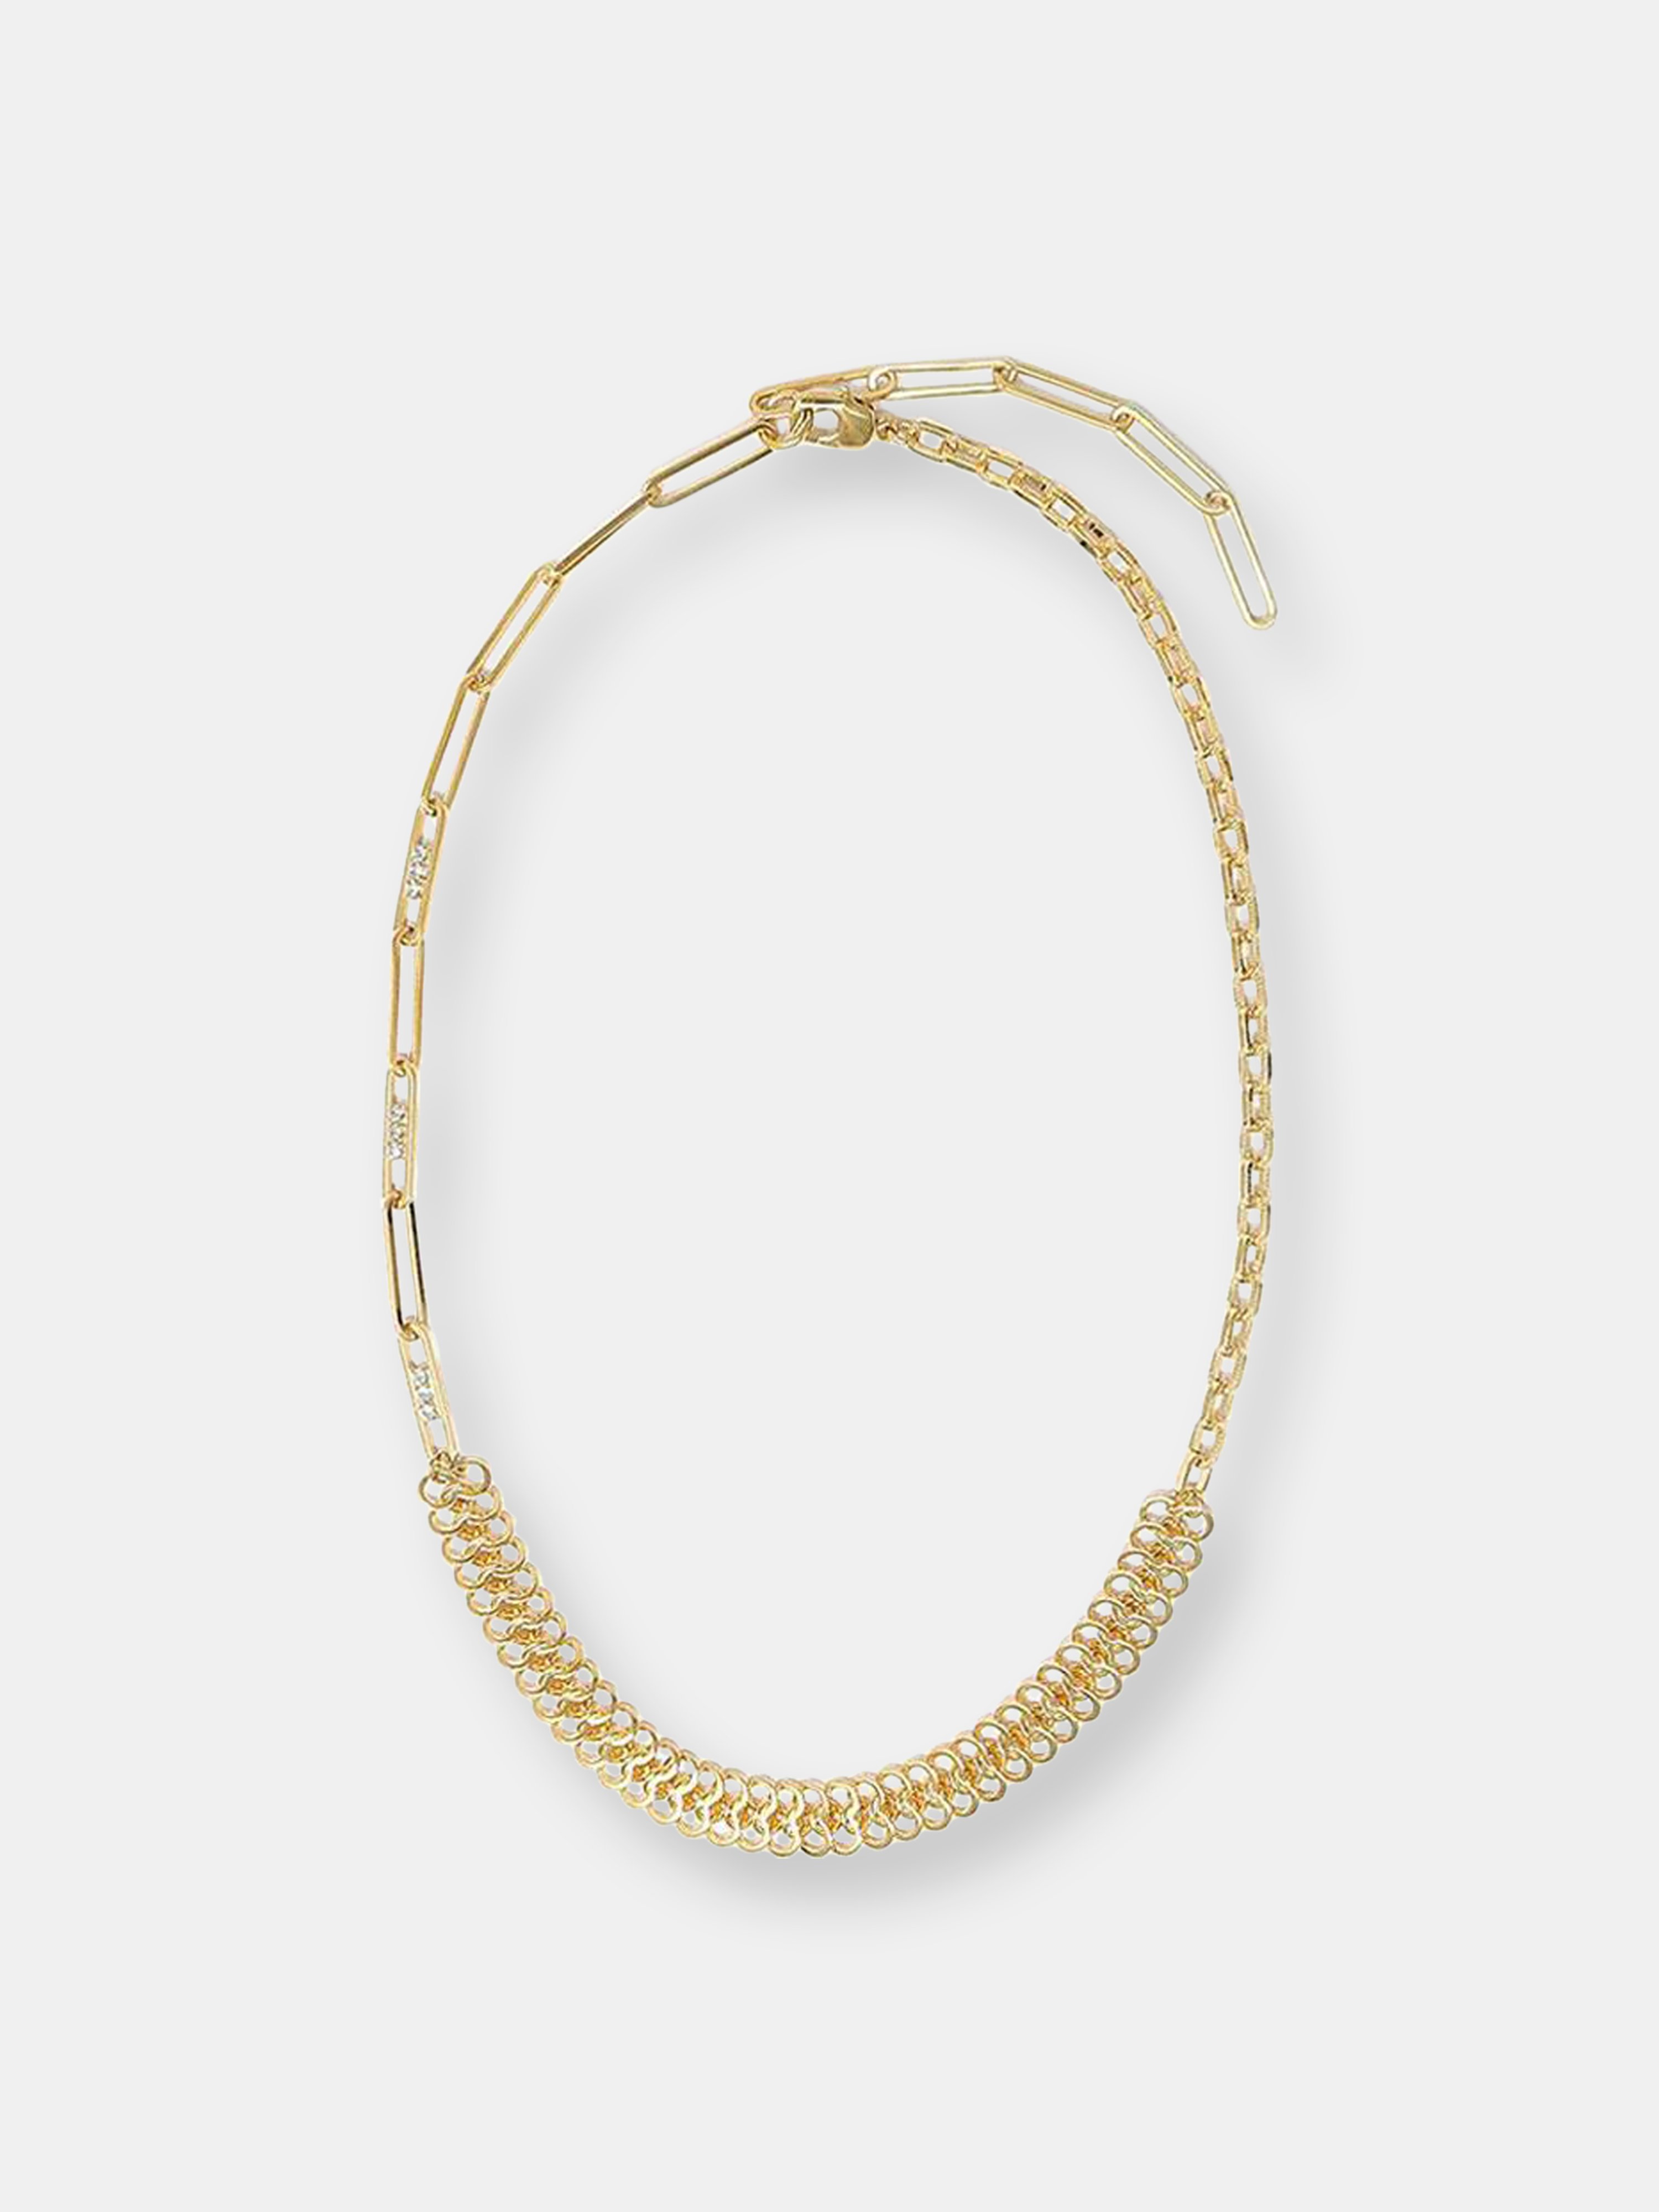 Joomi Lim Asymmetrical Chain & Crystal Link Necklace In Gold